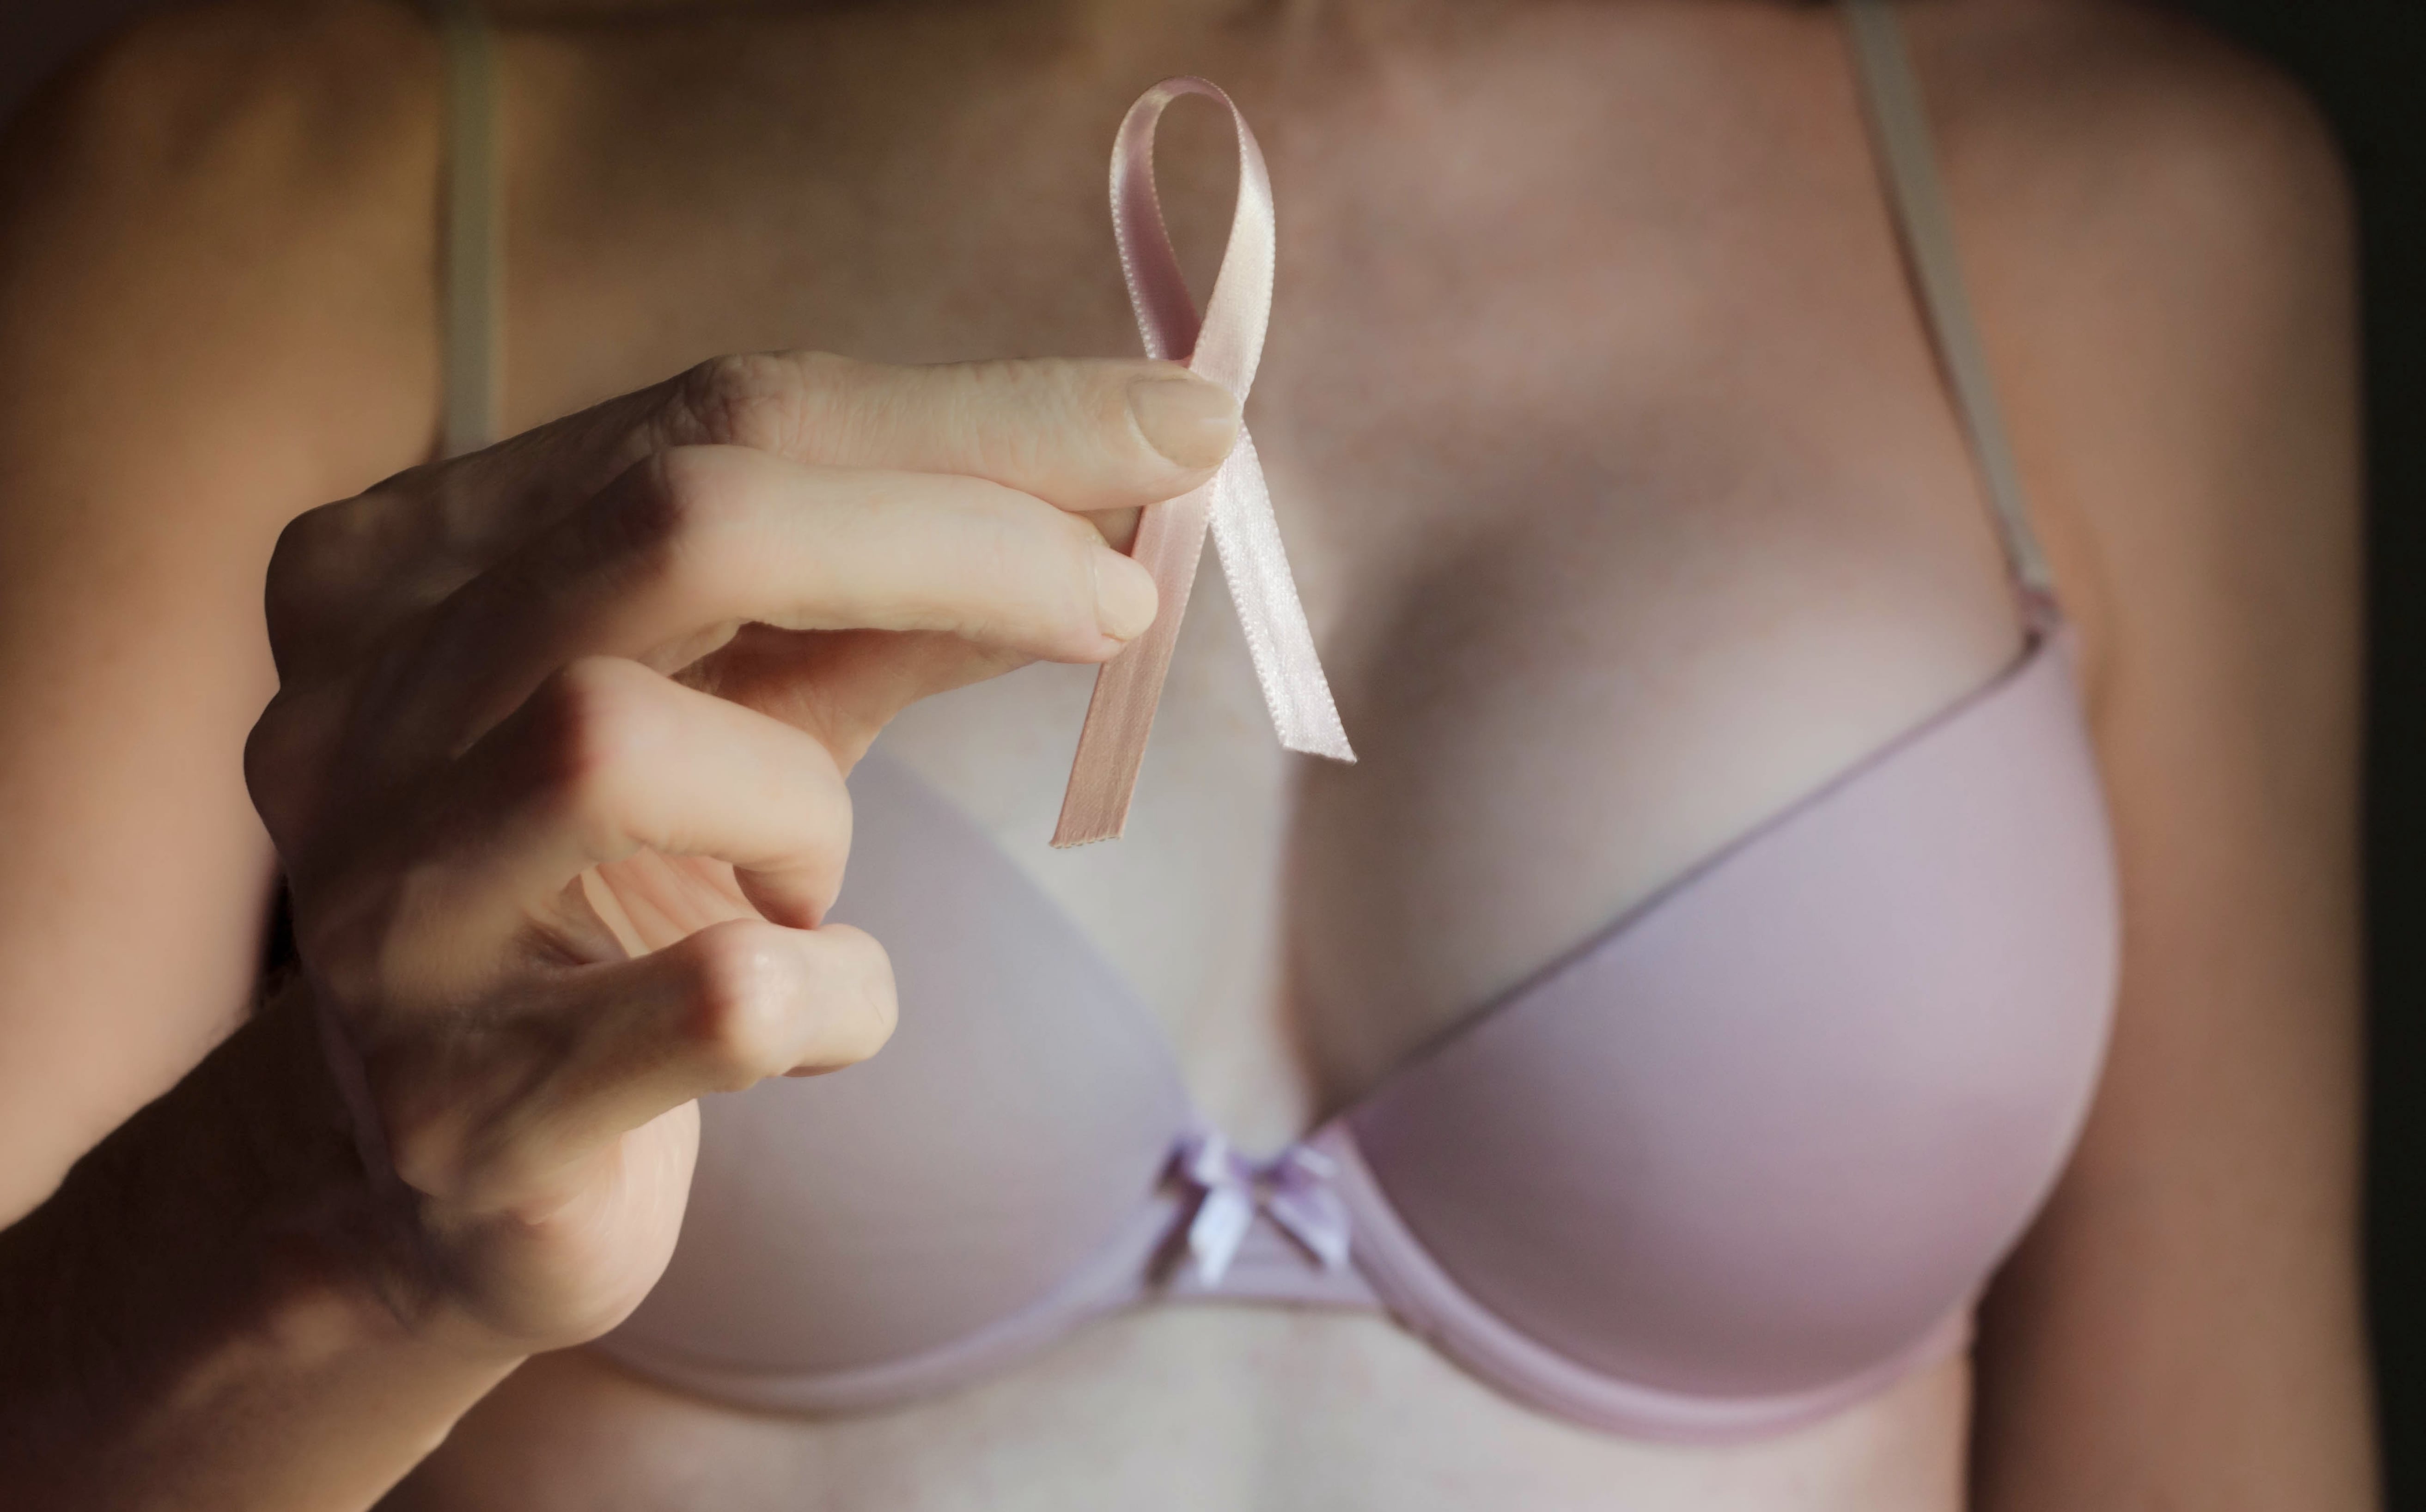 Why You Should Give Yourself a Monthly Breast Self Exam